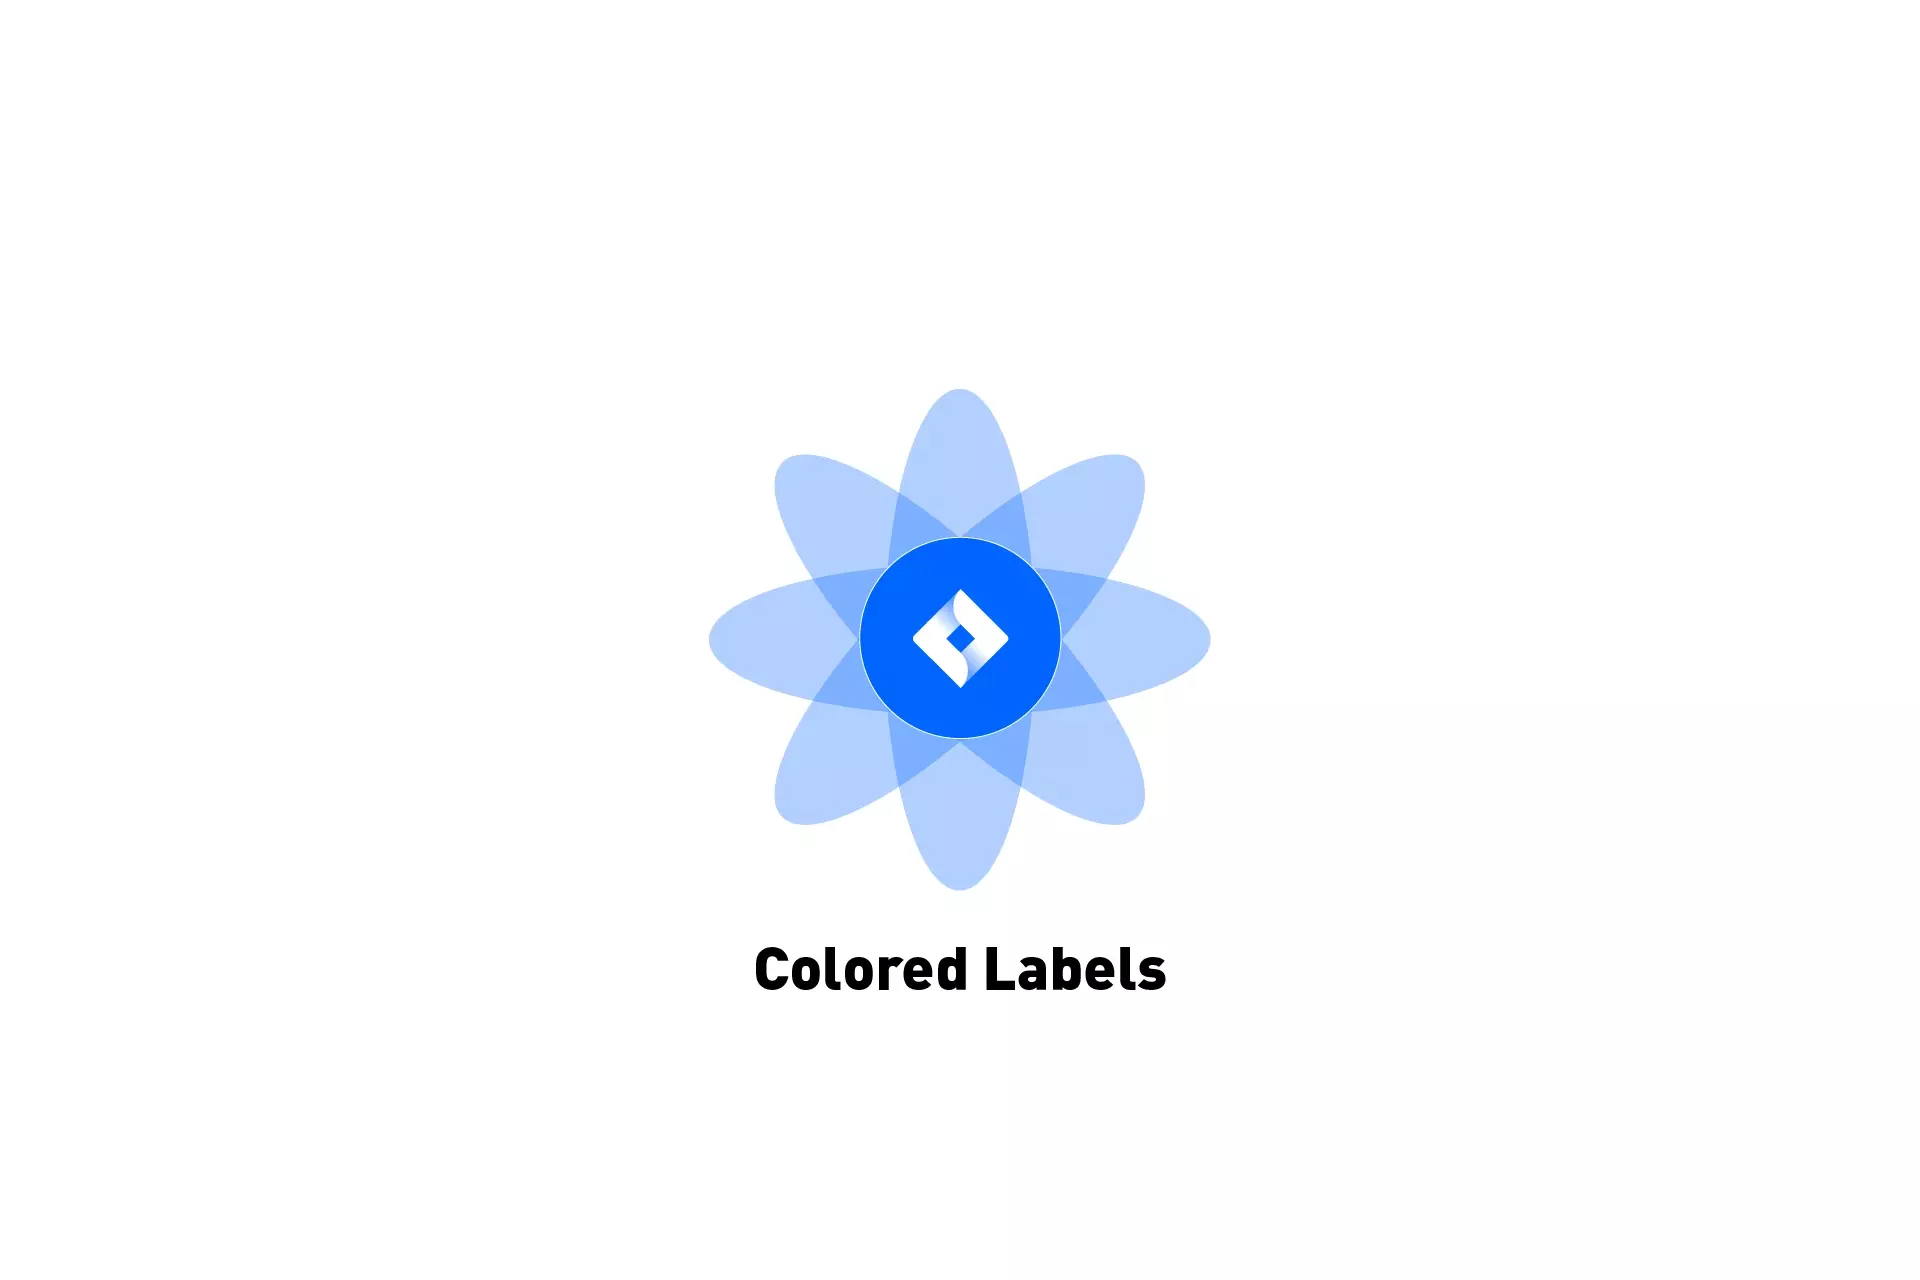 A flower that represents JIRA with the text "Colored Labels" beneath it.